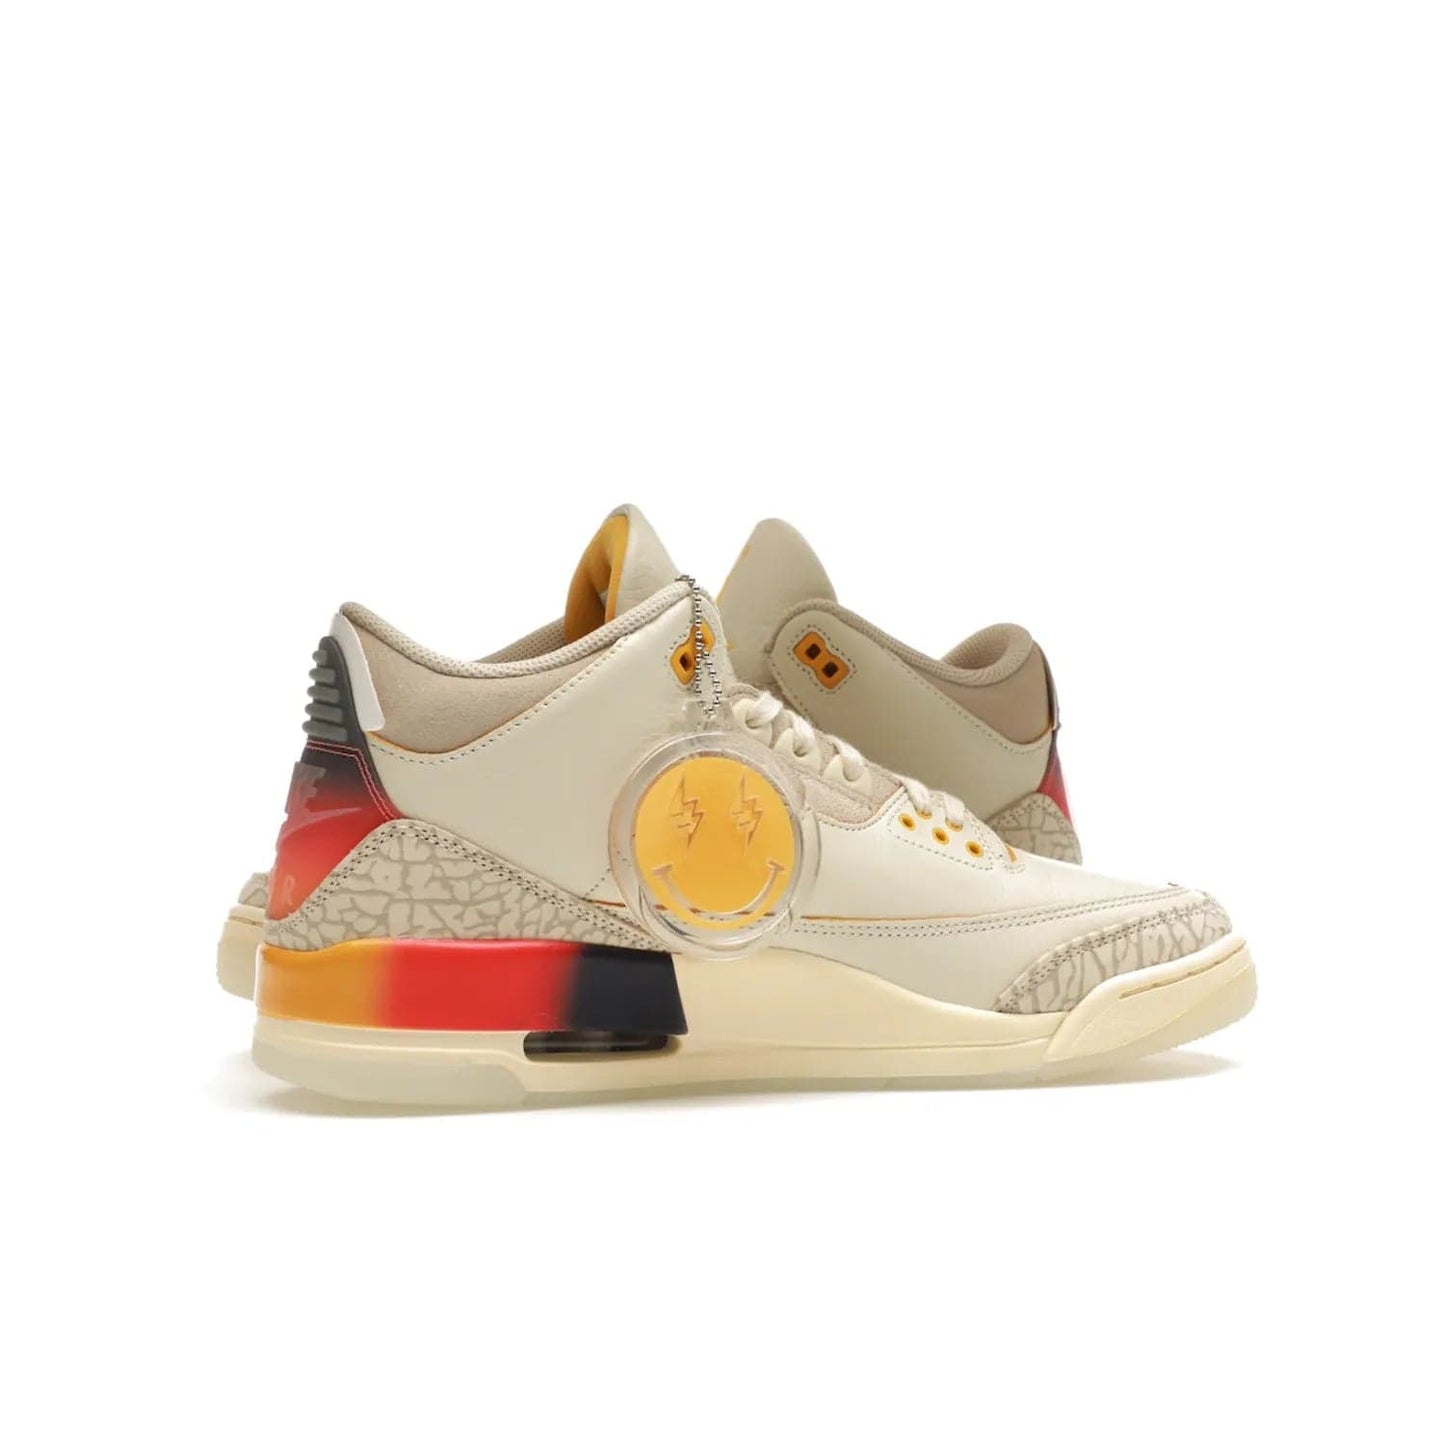 Jordan 3 Retro SP J Balvin Medellín Sunset - Image 17 - Only at www.BallersClubKickz.com - J Balvin x Jordan 3 Retro SP: Celebrate the joy of life with a colorful, homage to the electrifying reggaeton culture and iconic Jordan 3. Limited edition, Sept. 23. $250.